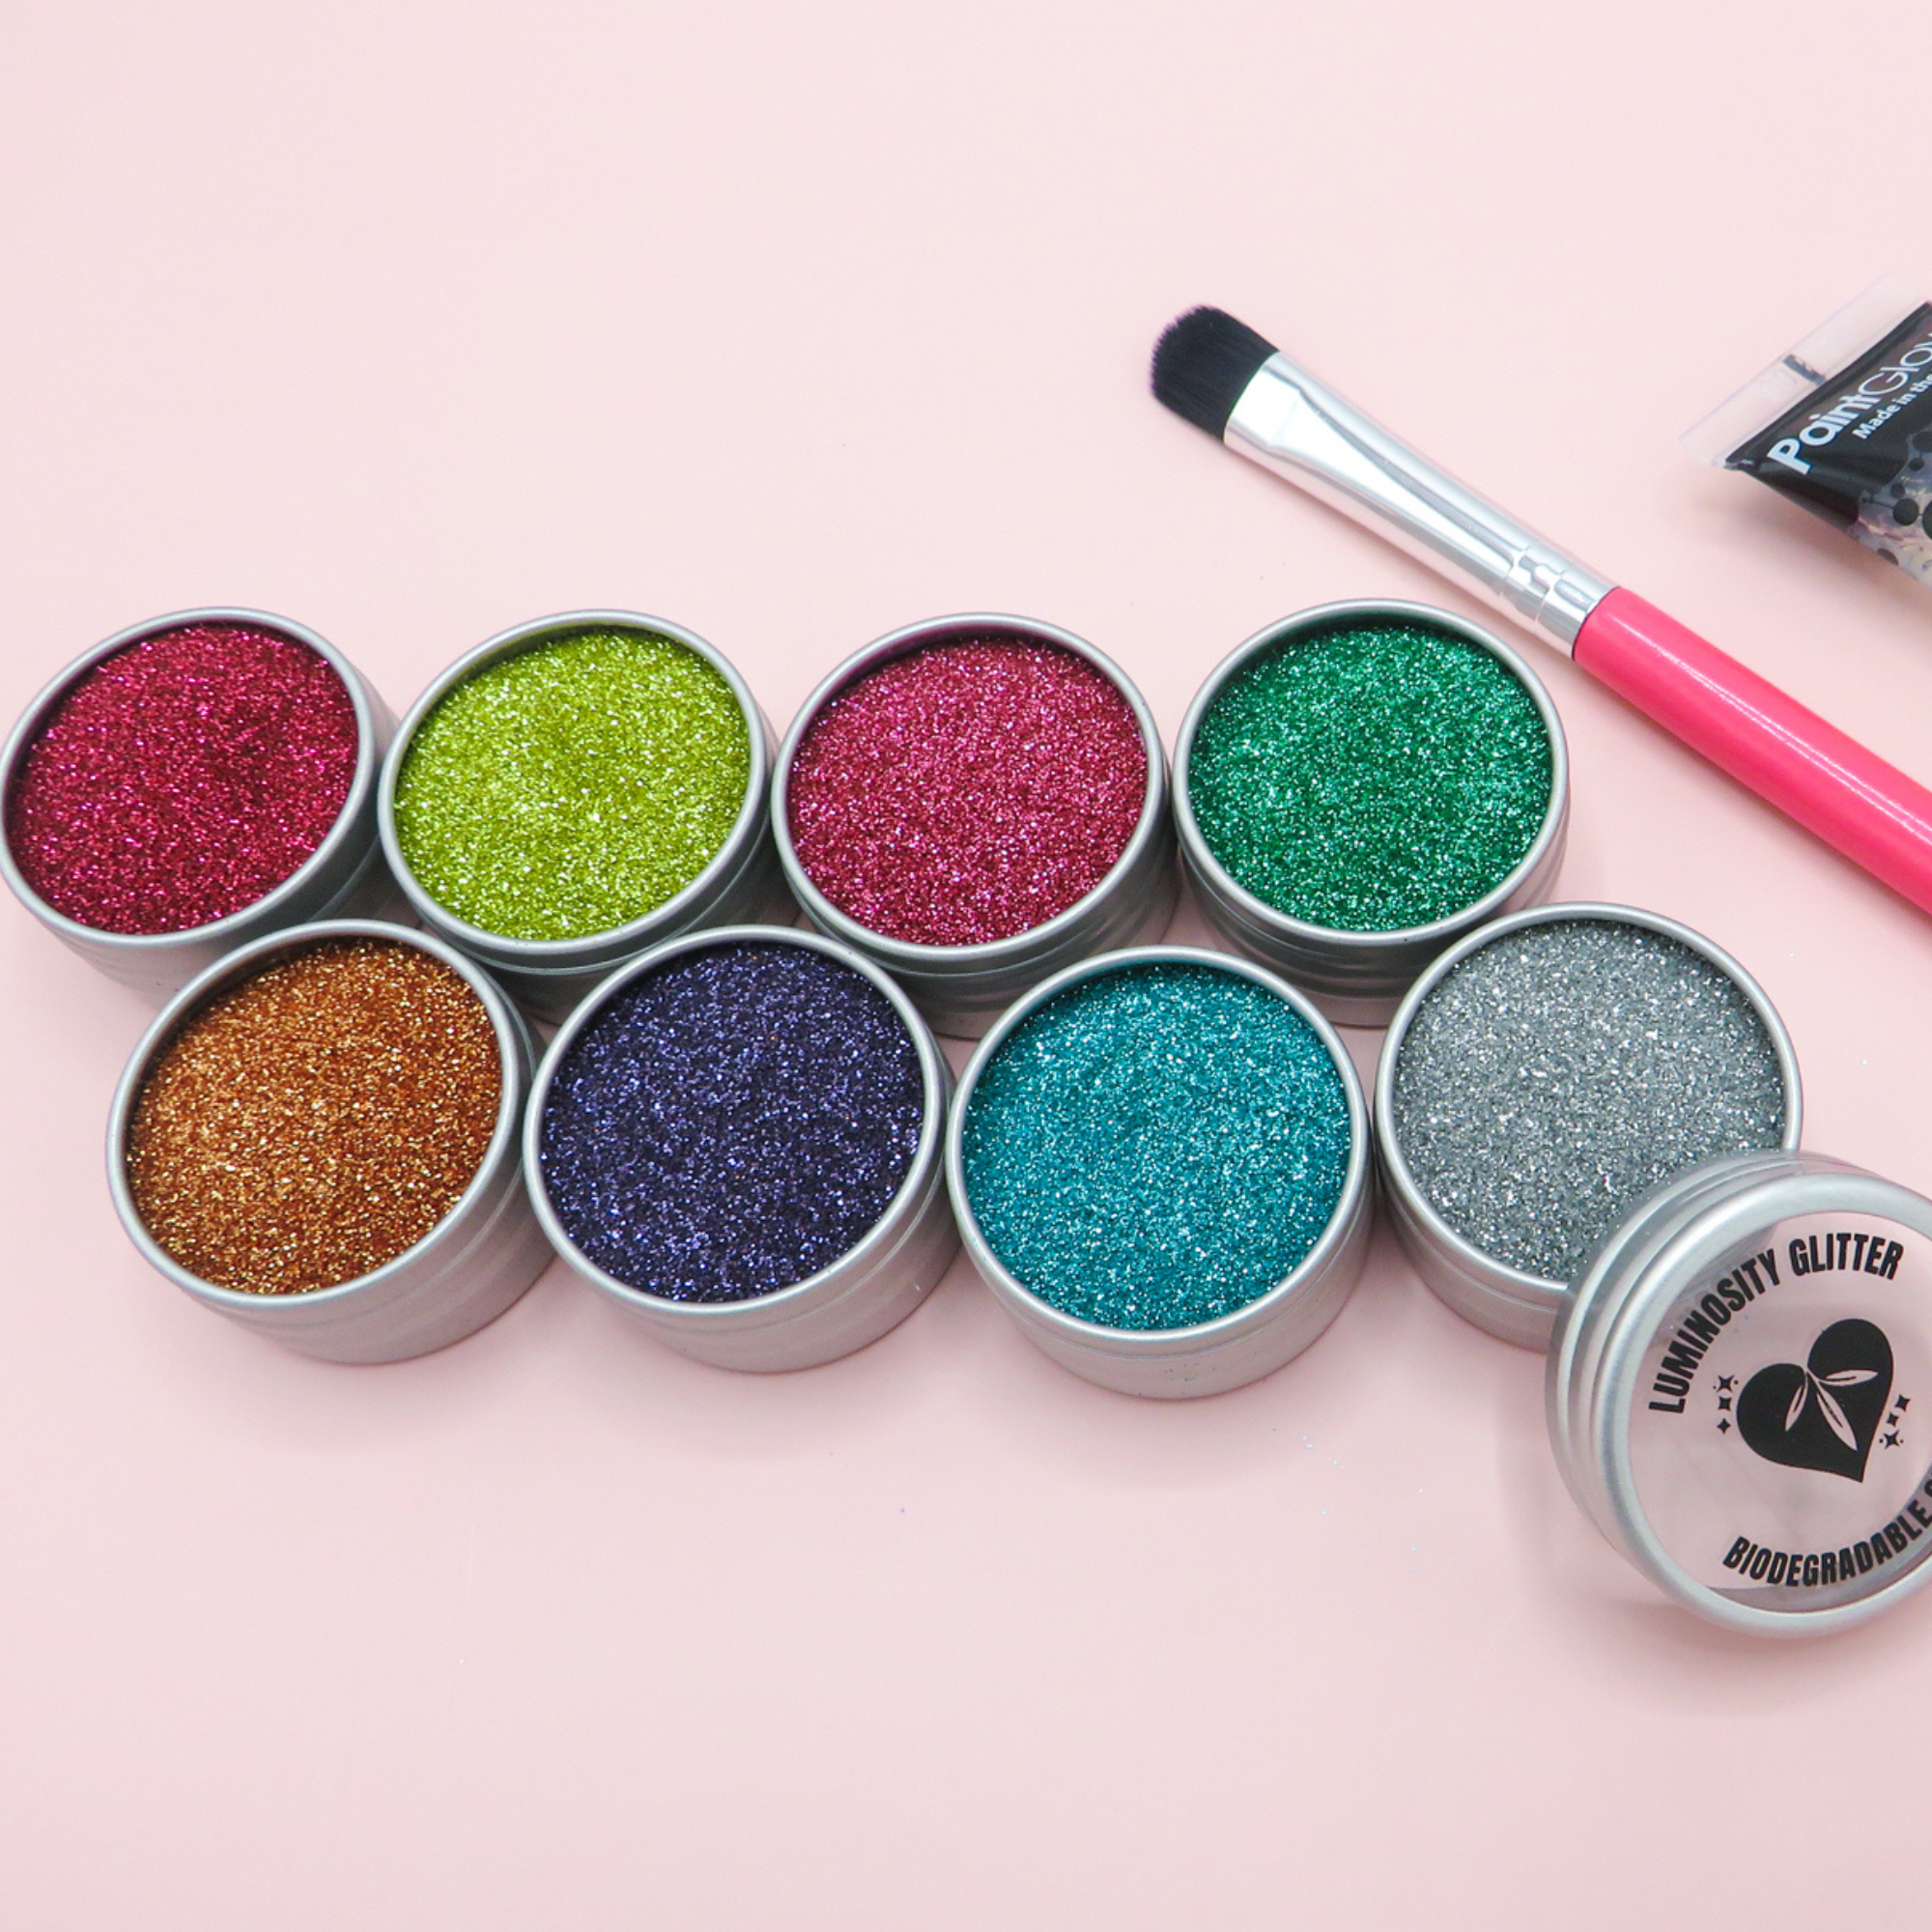 Fine cosmetic eco glitter for glitter eyes and glitter tattoos